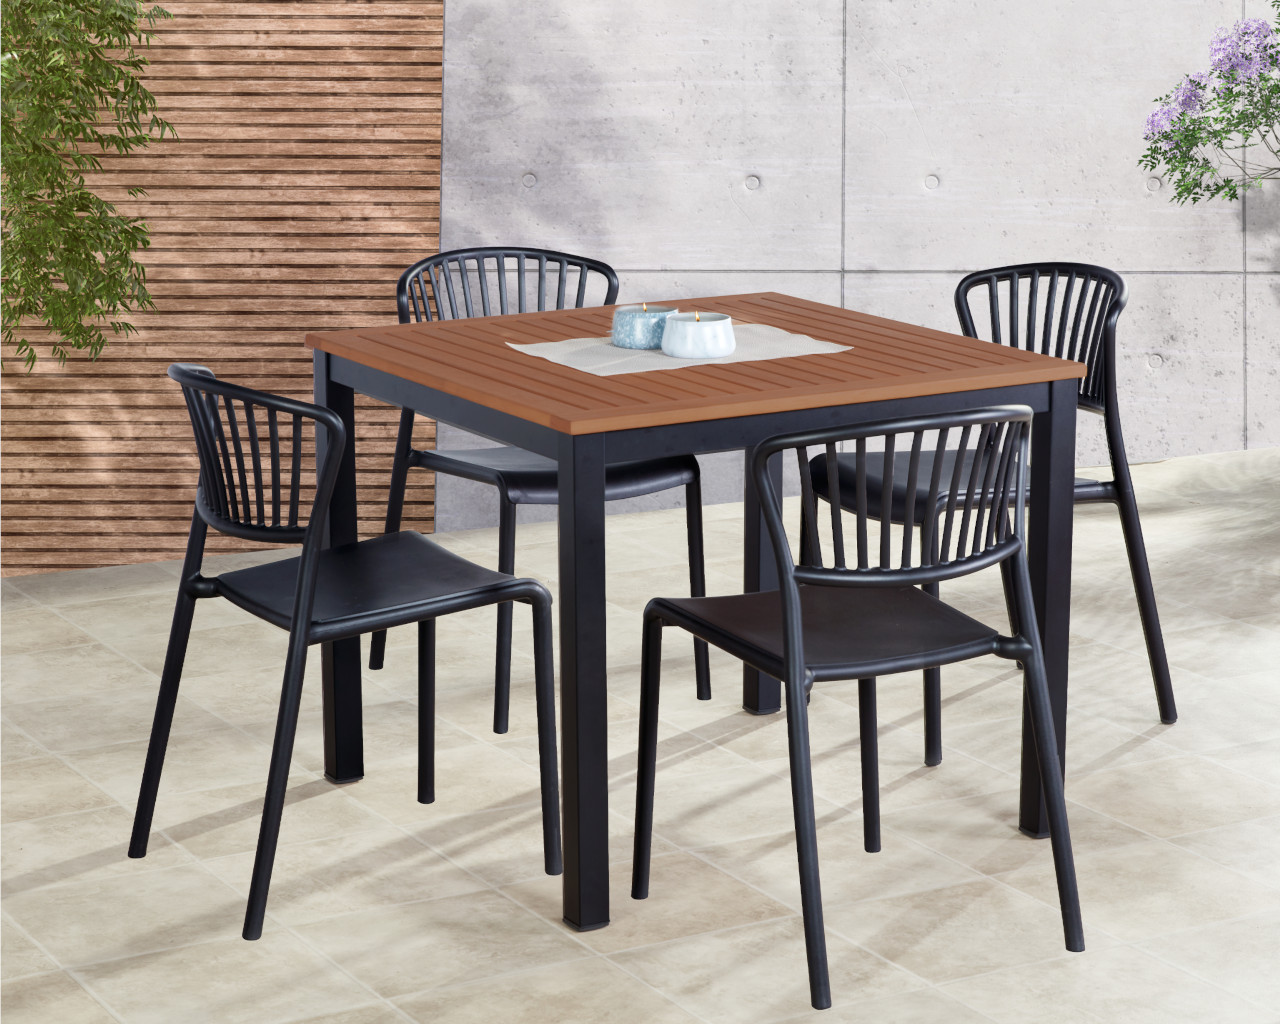 Florence-Lynx 5 Piece Dining Setting (Black), , hi-res image number null